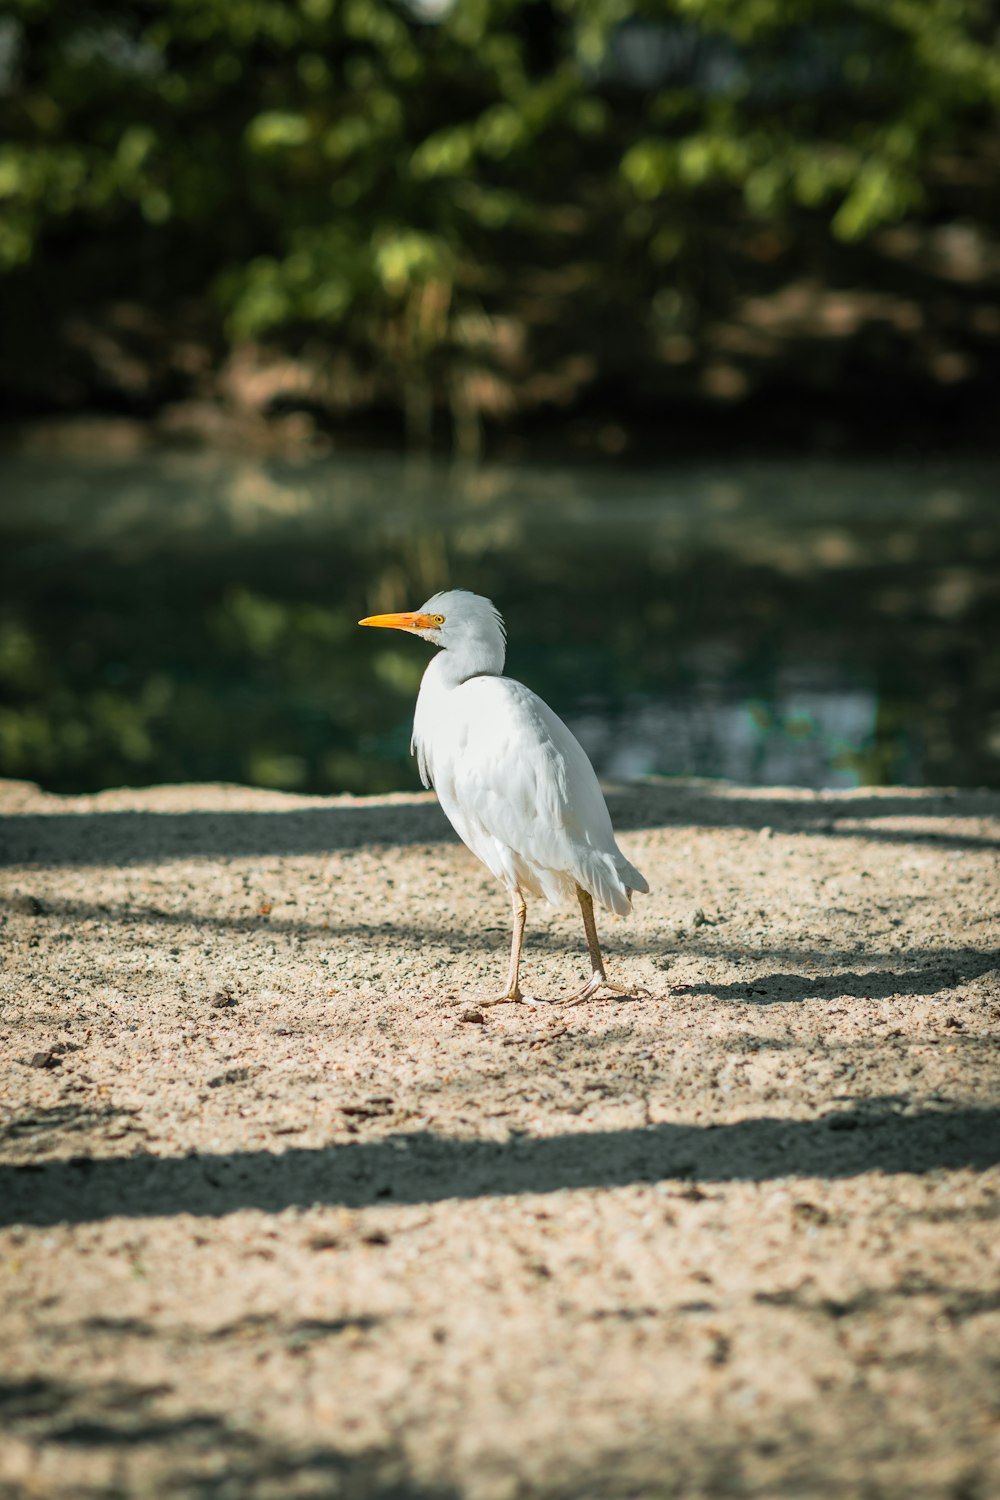 a white bird with a yellow beak standing in the sand